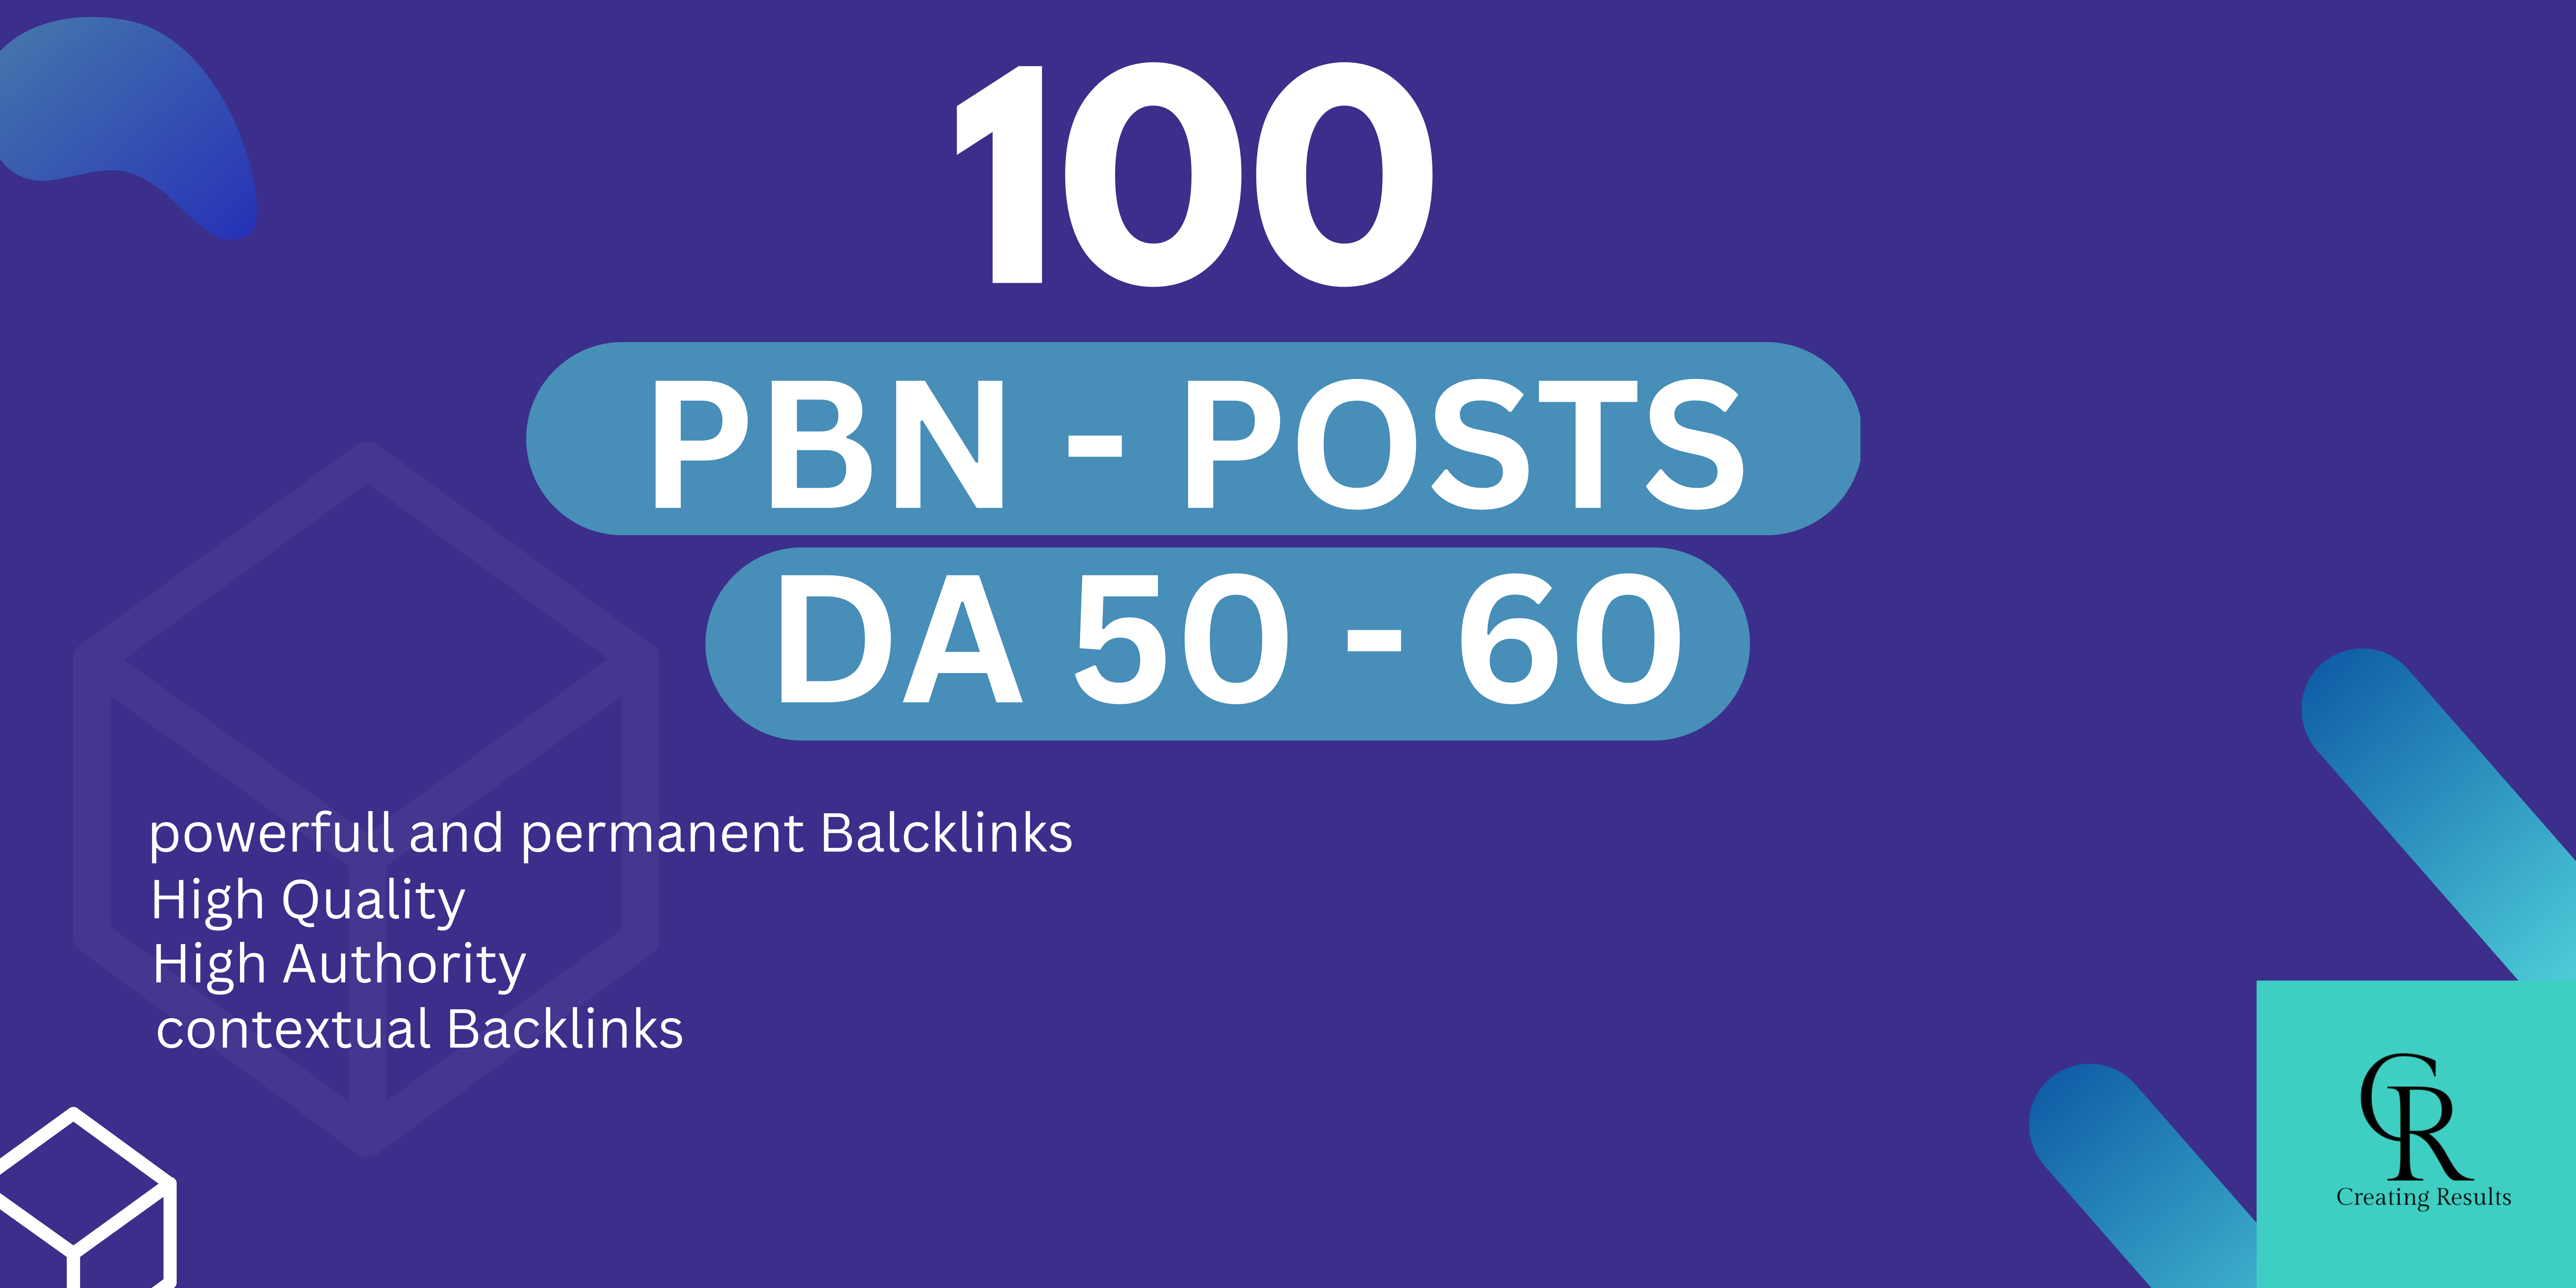 Boost your ranking with 100 Unique PBN Posts With High DA50 to DA60 Backlinks forever